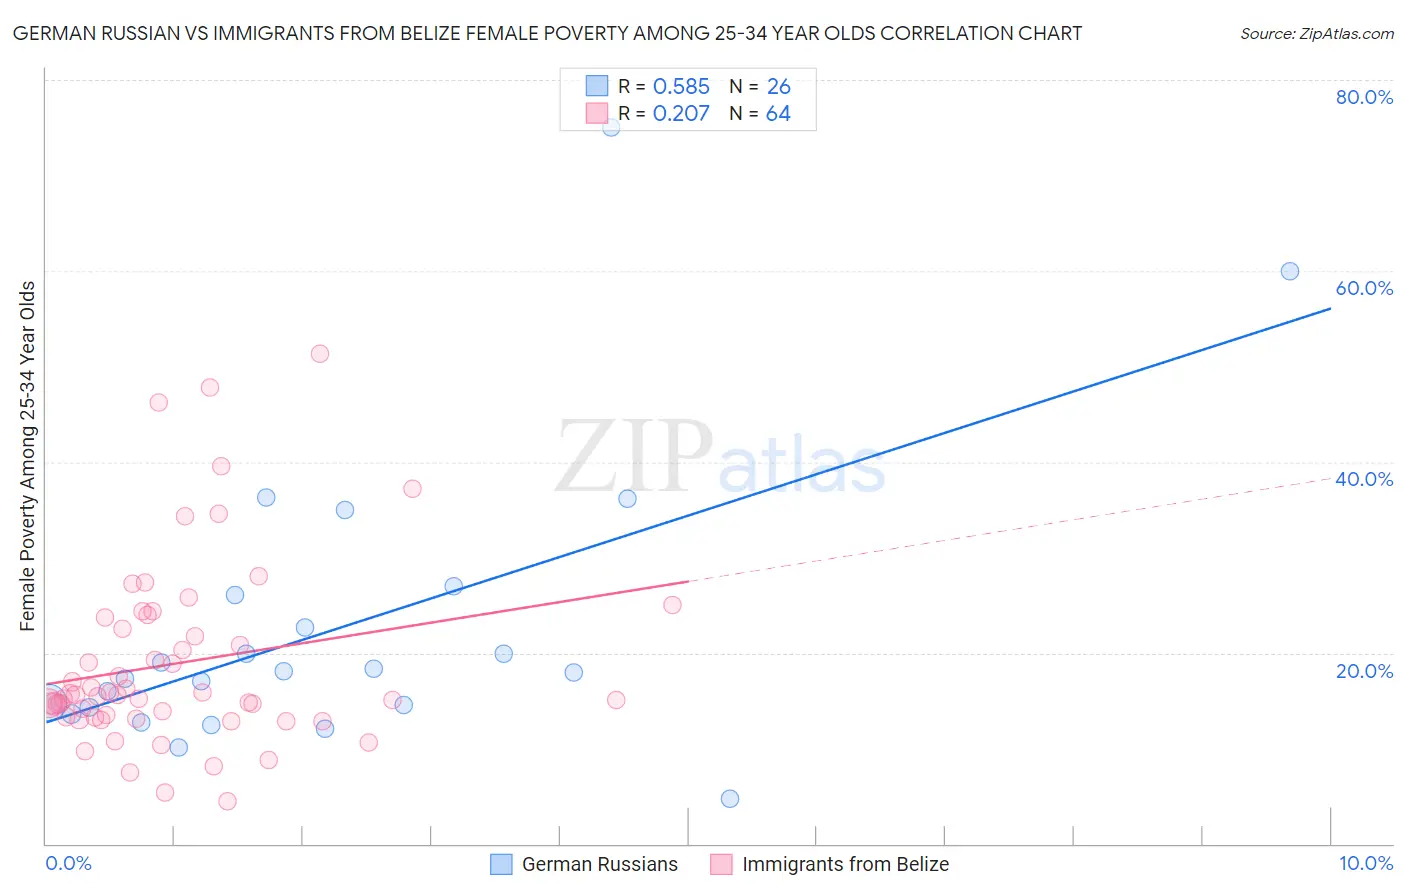 German Russian vs Immigrants from Belize Female Poverty Among 25-34 Year Olds